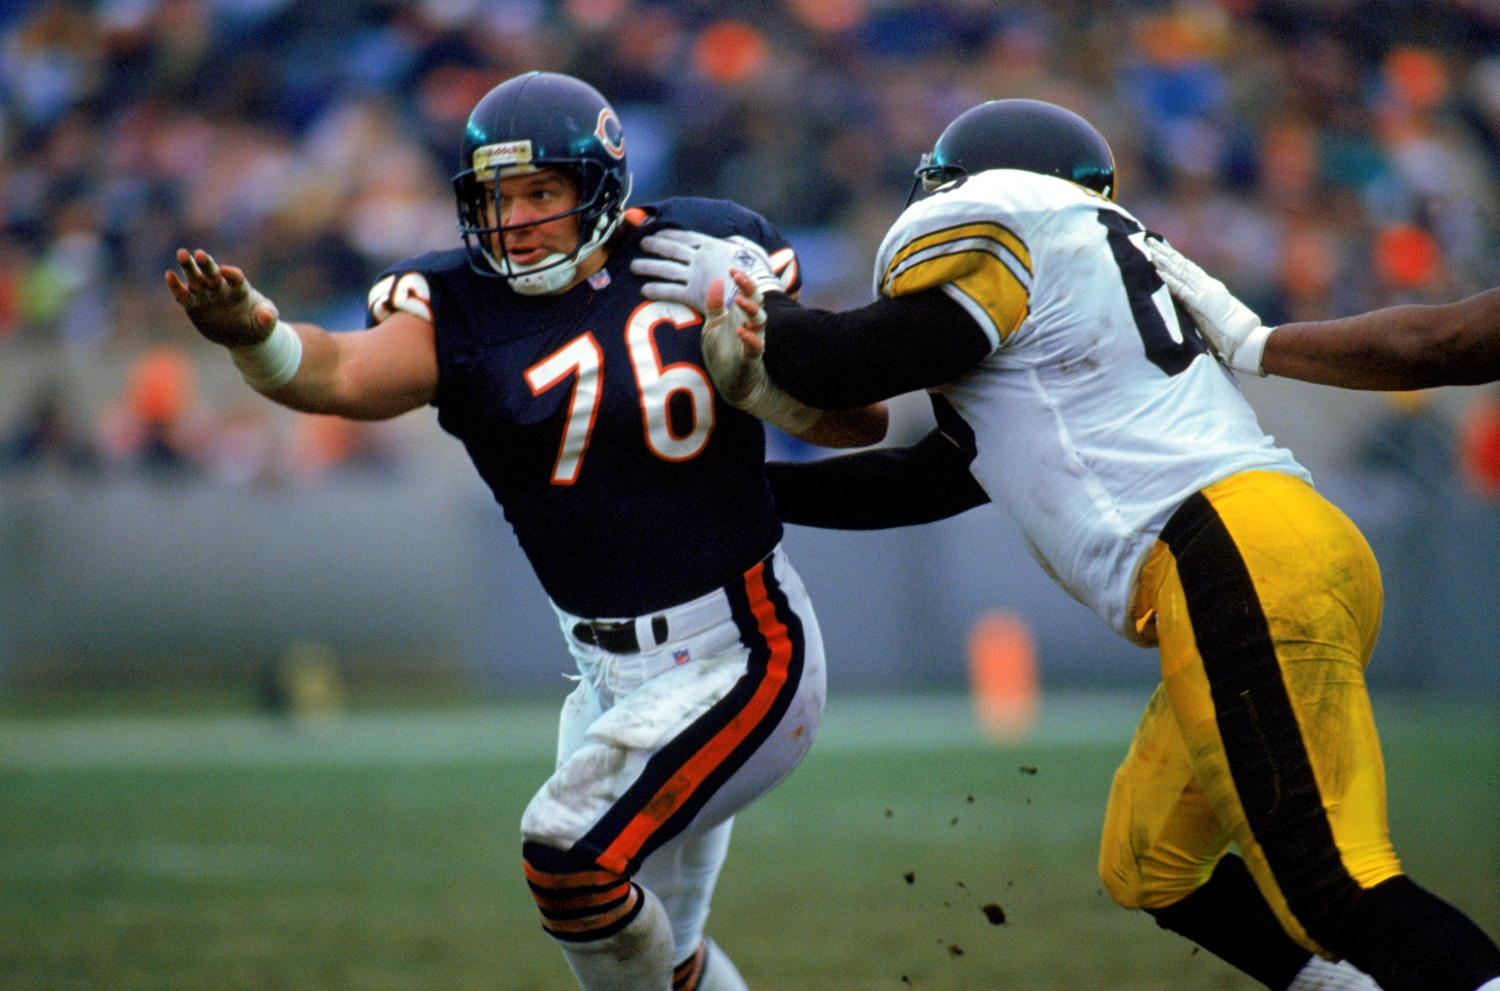 Chicago Bears defensive lineman Steve McMichael runs past a Pittsburgh Steelers player.